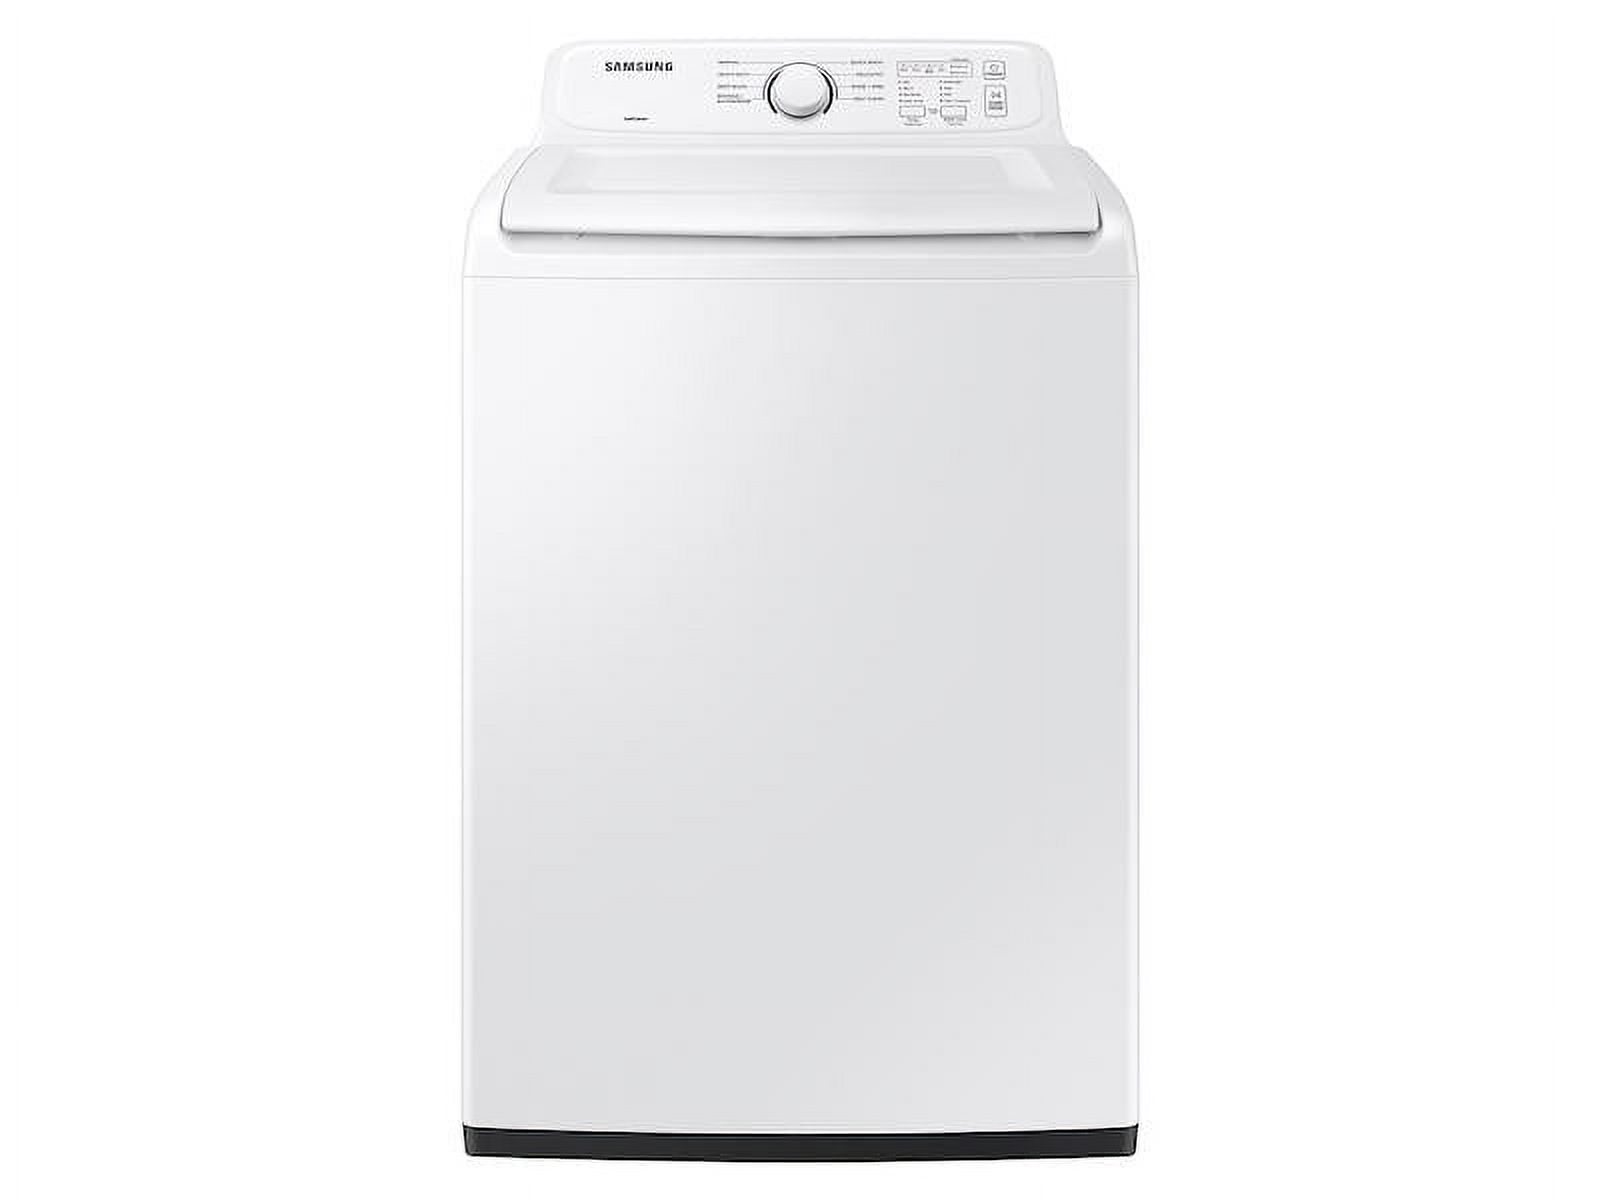 Samsung WA40A3005AW 4.0 Cu. Ft. High-Efficiency Top Load Washer - White - image 1 of 5